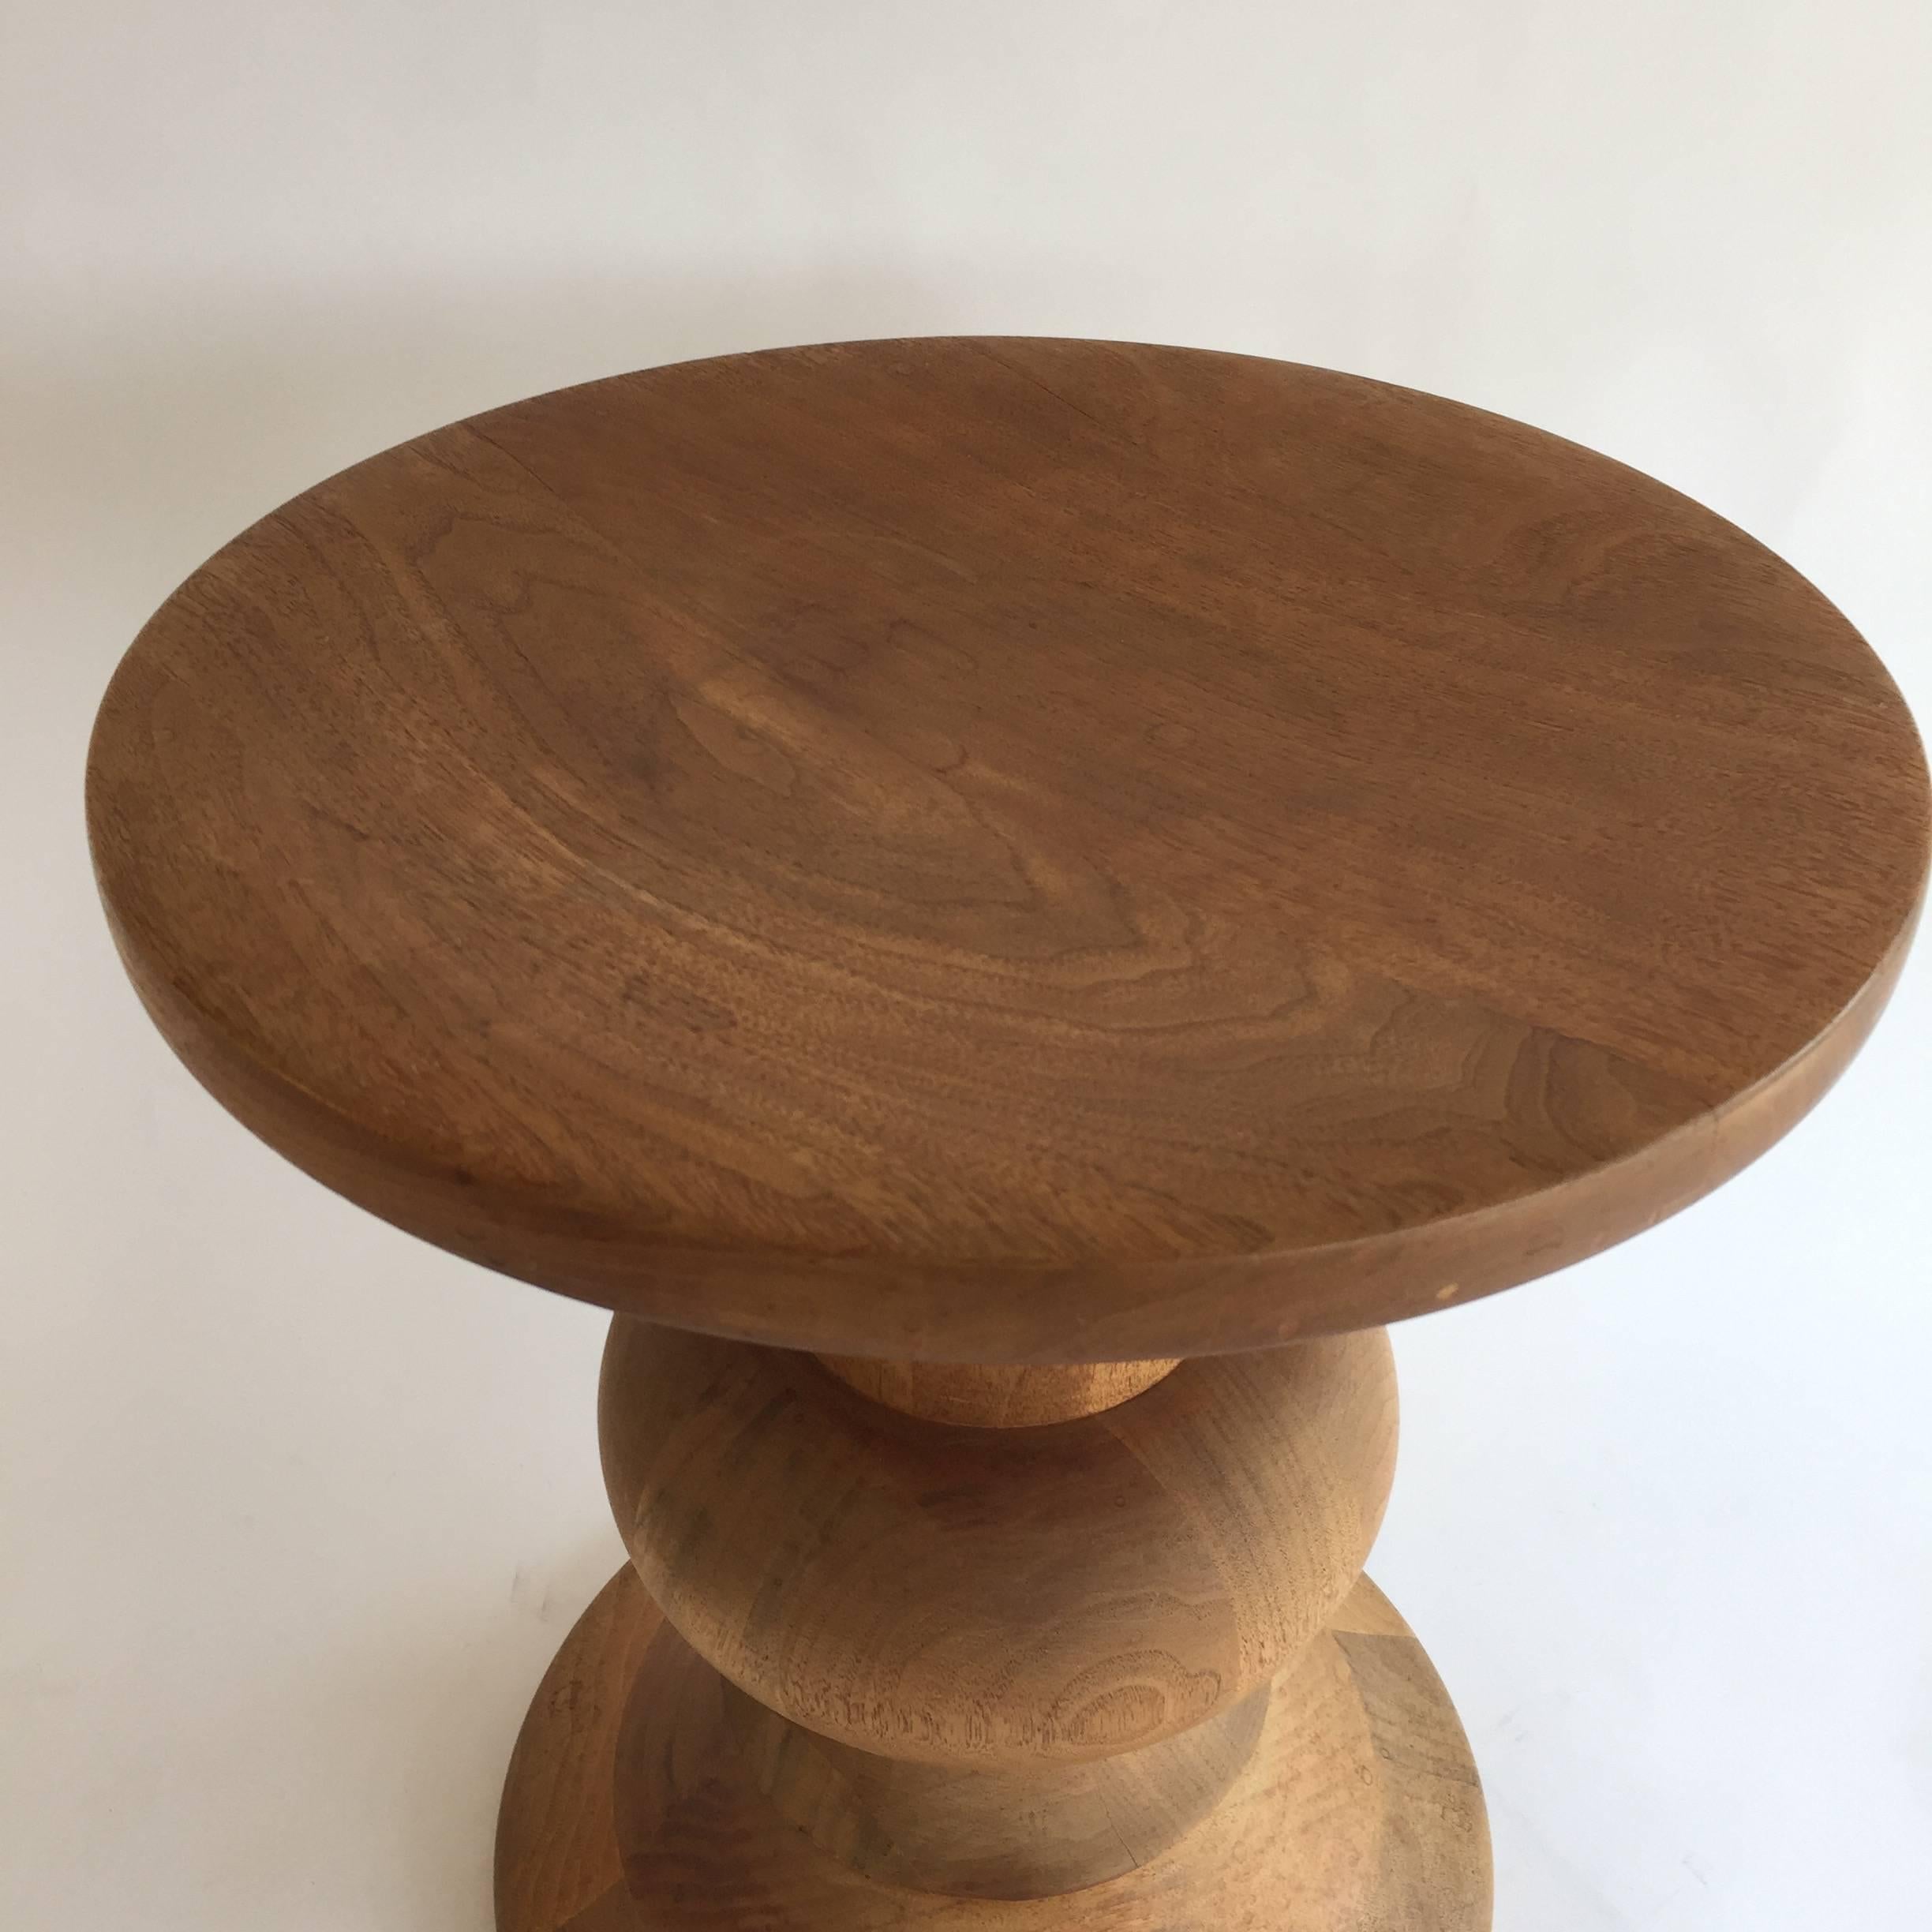 Time-life stool by Ray Eames, Model B in [Wood]. Commissioned by Time Inc. for multiple lobbies in Rockefeller Centre and produced by Herman Miller. May also be used as a side table.